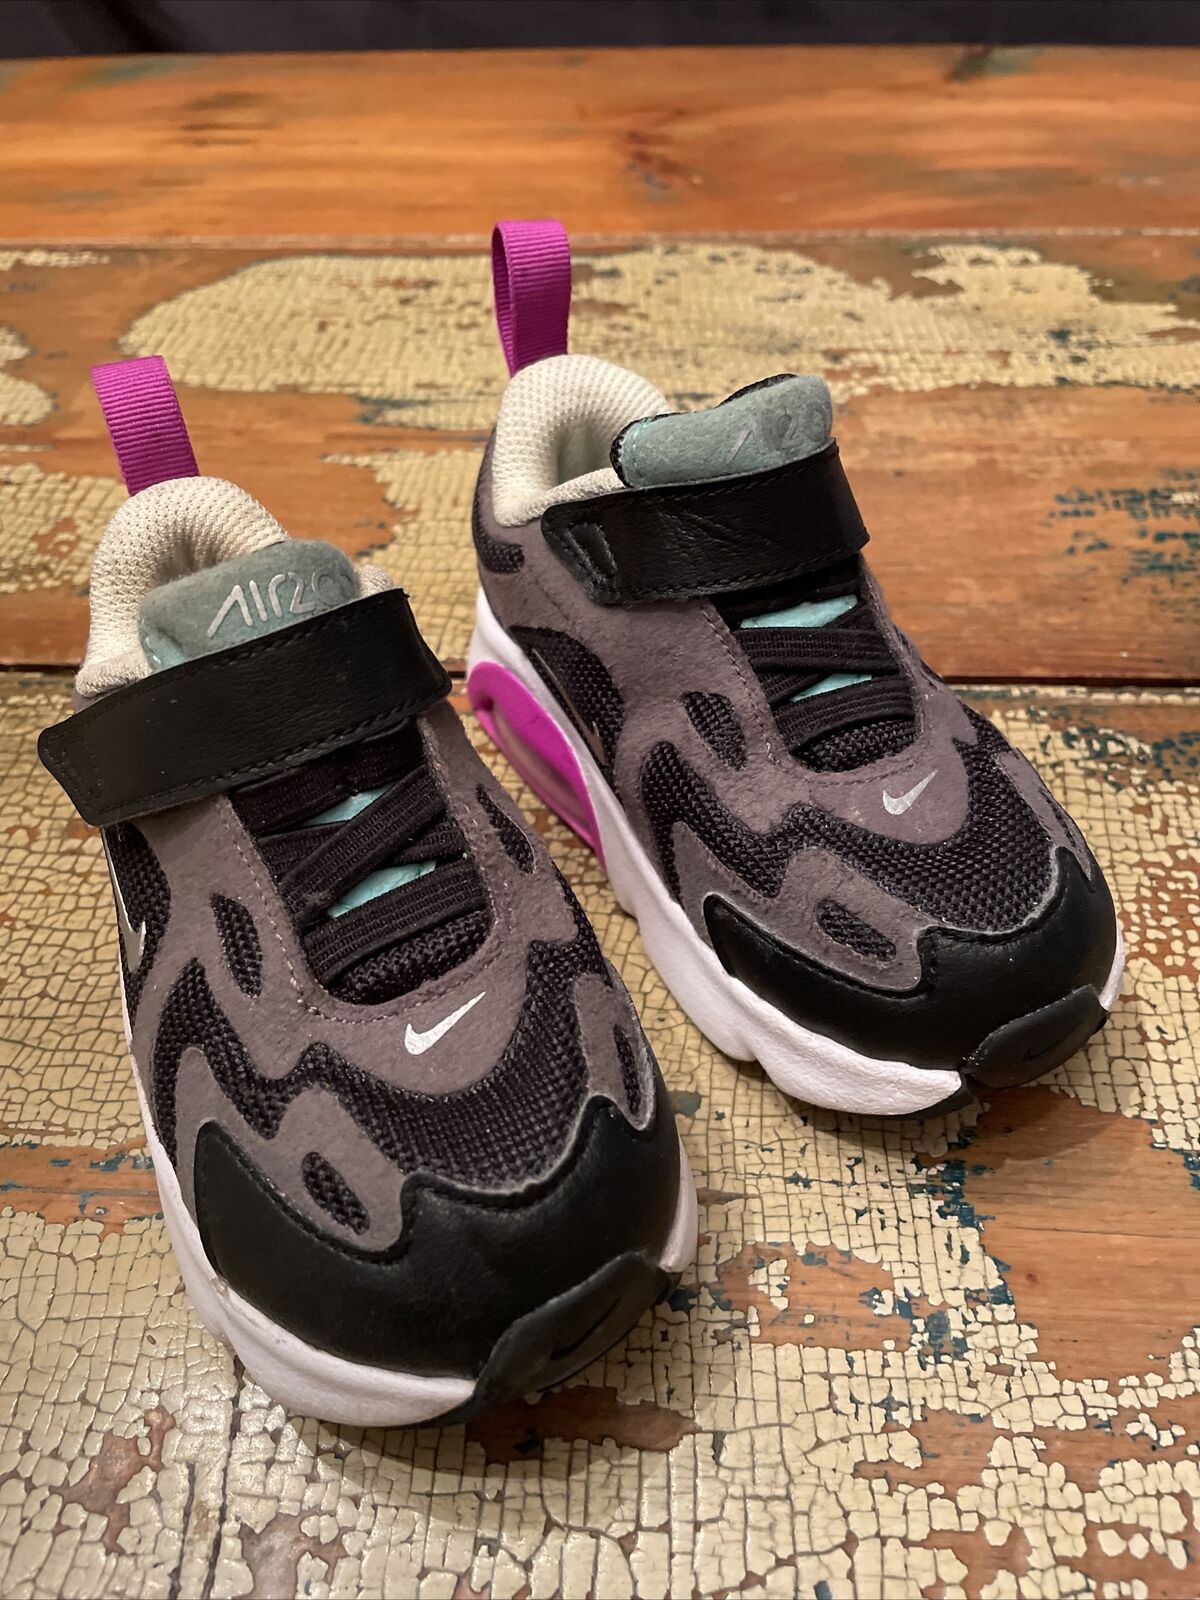 Nike Toddler Size 6C Air Max 200 (TD) Shoes Black/Gray/Purple AT5629-004